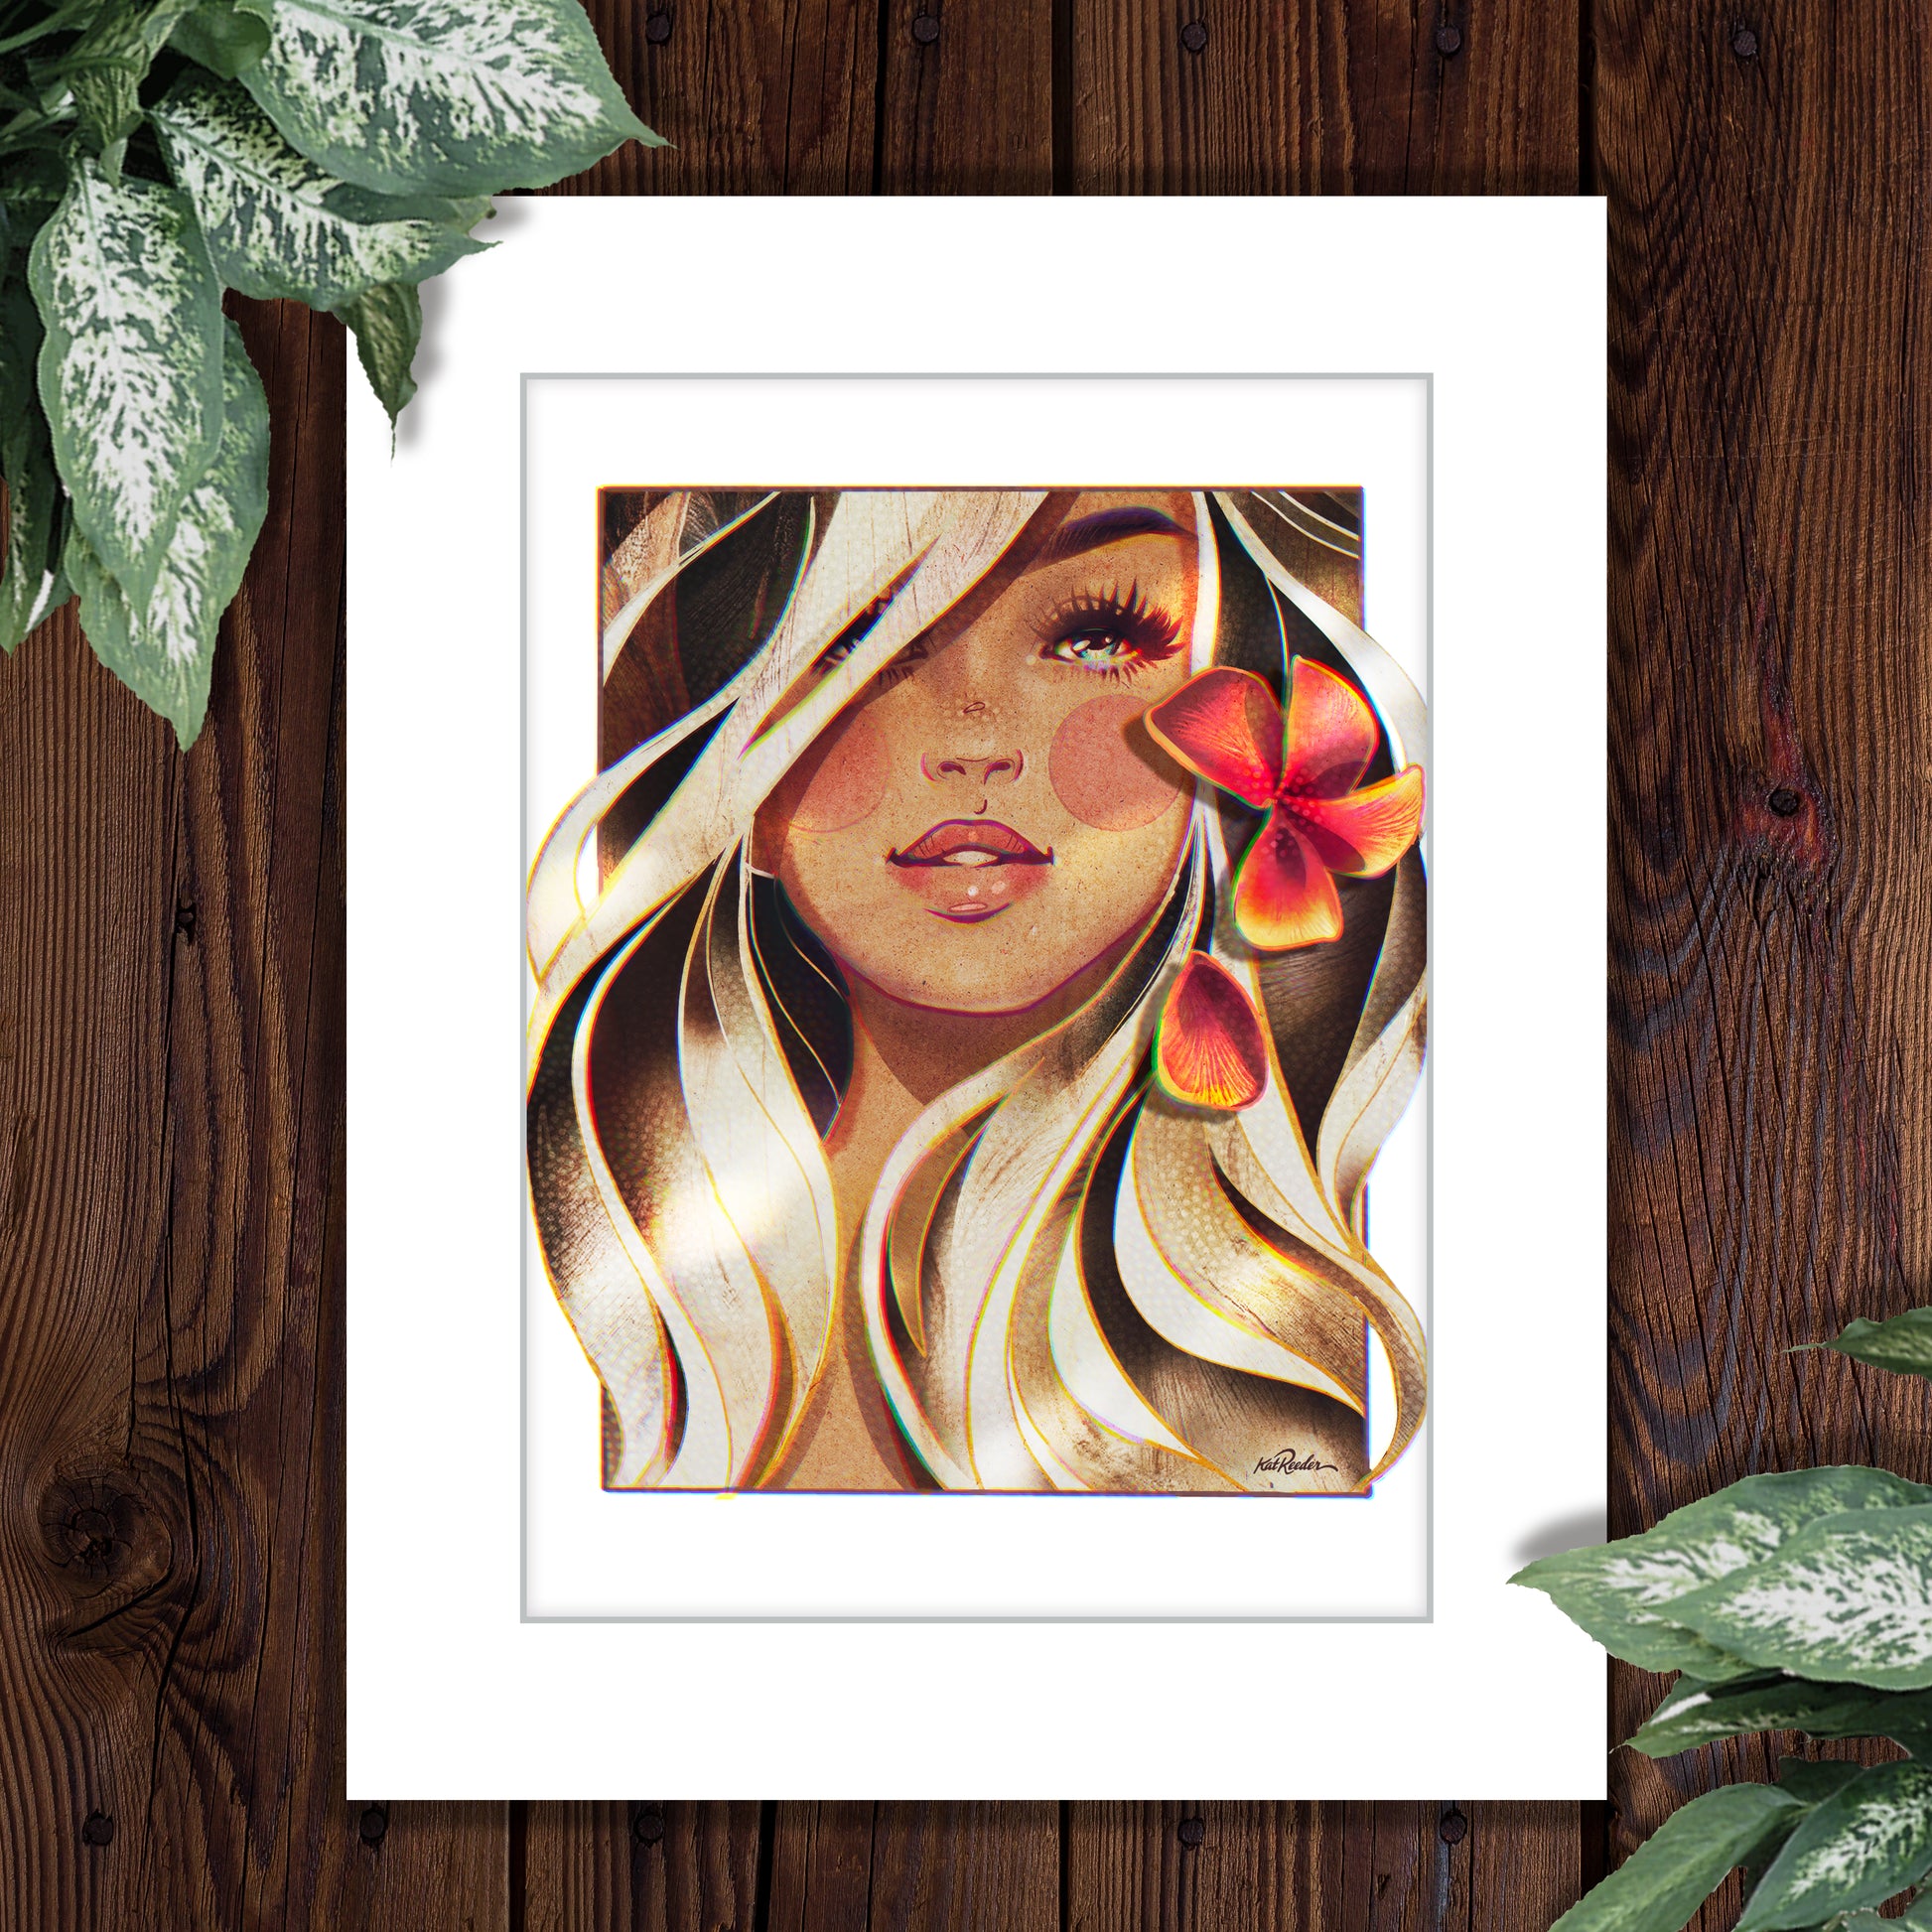 11x14 matted print of an illustration of a blond surfer girl with an orange plumeria in her left ear in a 1970s print style. 